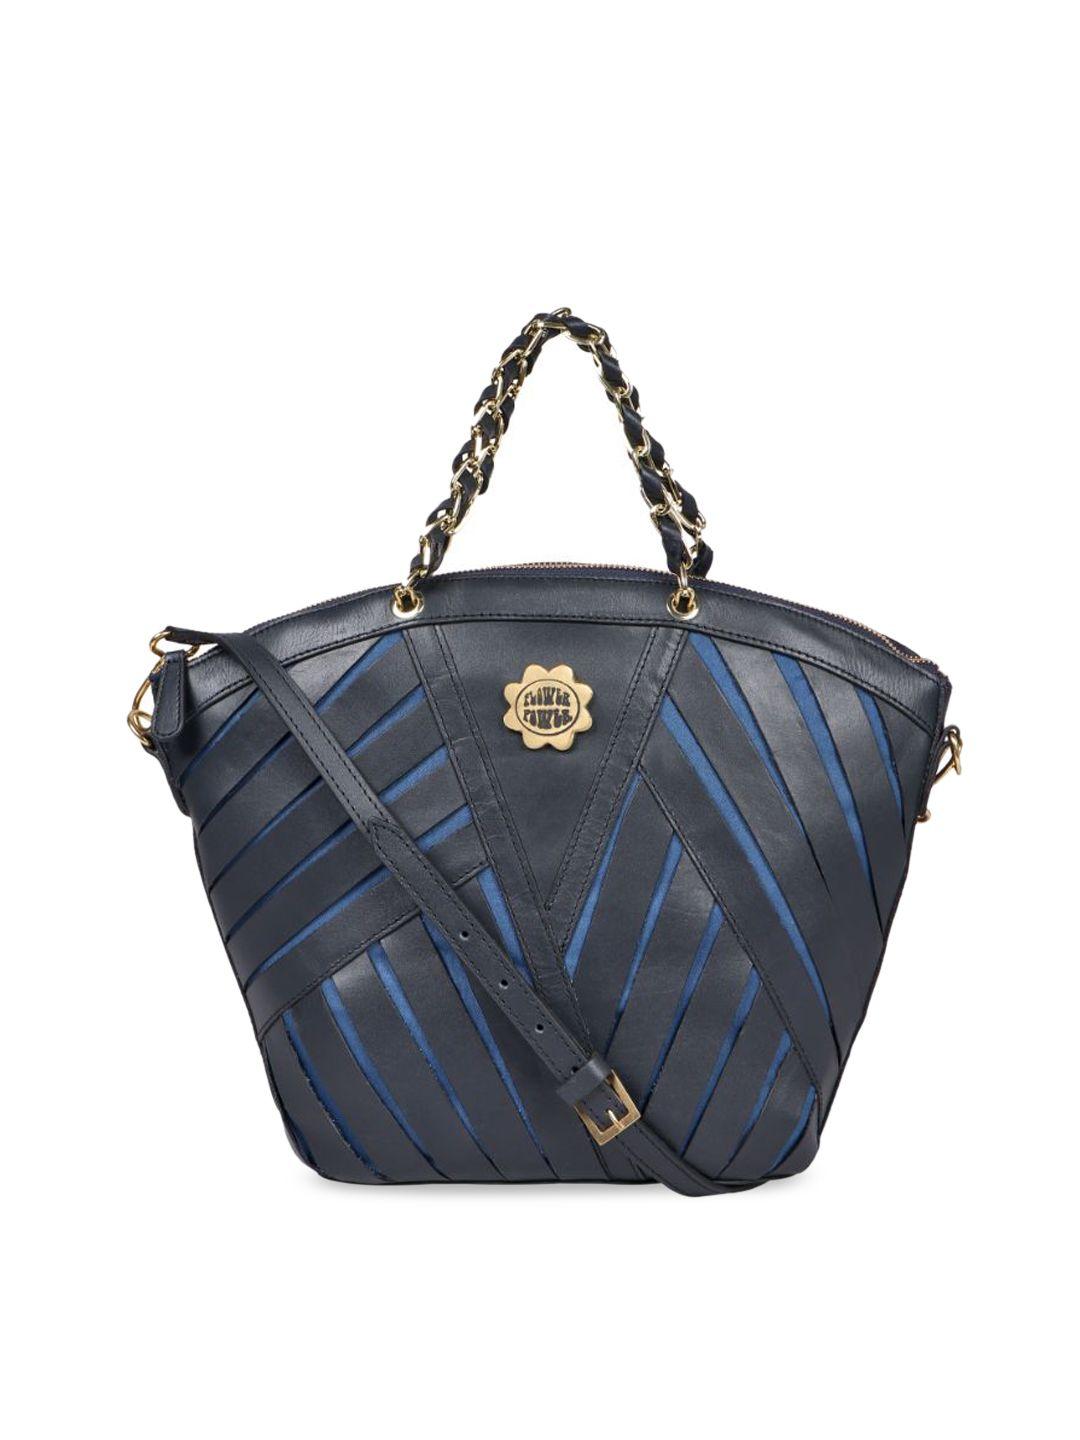 hidesign blue geometric textured leather structured handheld bag with quilted